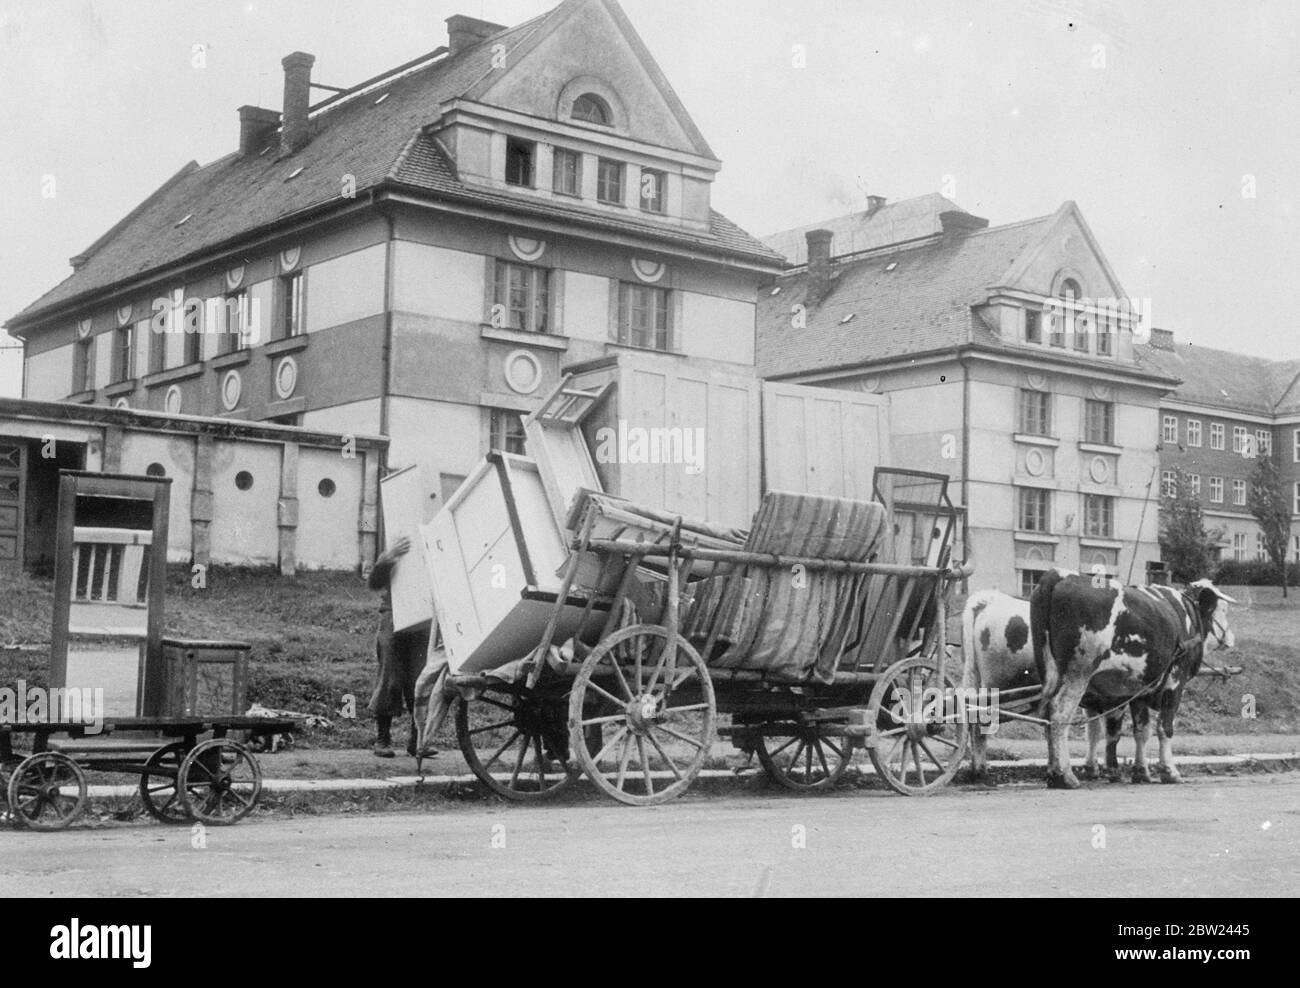 Politcka, the Bohemian town with 90% Czech population and only 2% German, has been taken over by the Germans under the Munich agreement. The town was founded in 1265 by King Premysl II. Photo shows: Possessions of an anti-Nazi refugee loaded onto a bullock cart at the farm as the family makes its escape before the entry of the Germans. 11 October 1938 Stock Photo